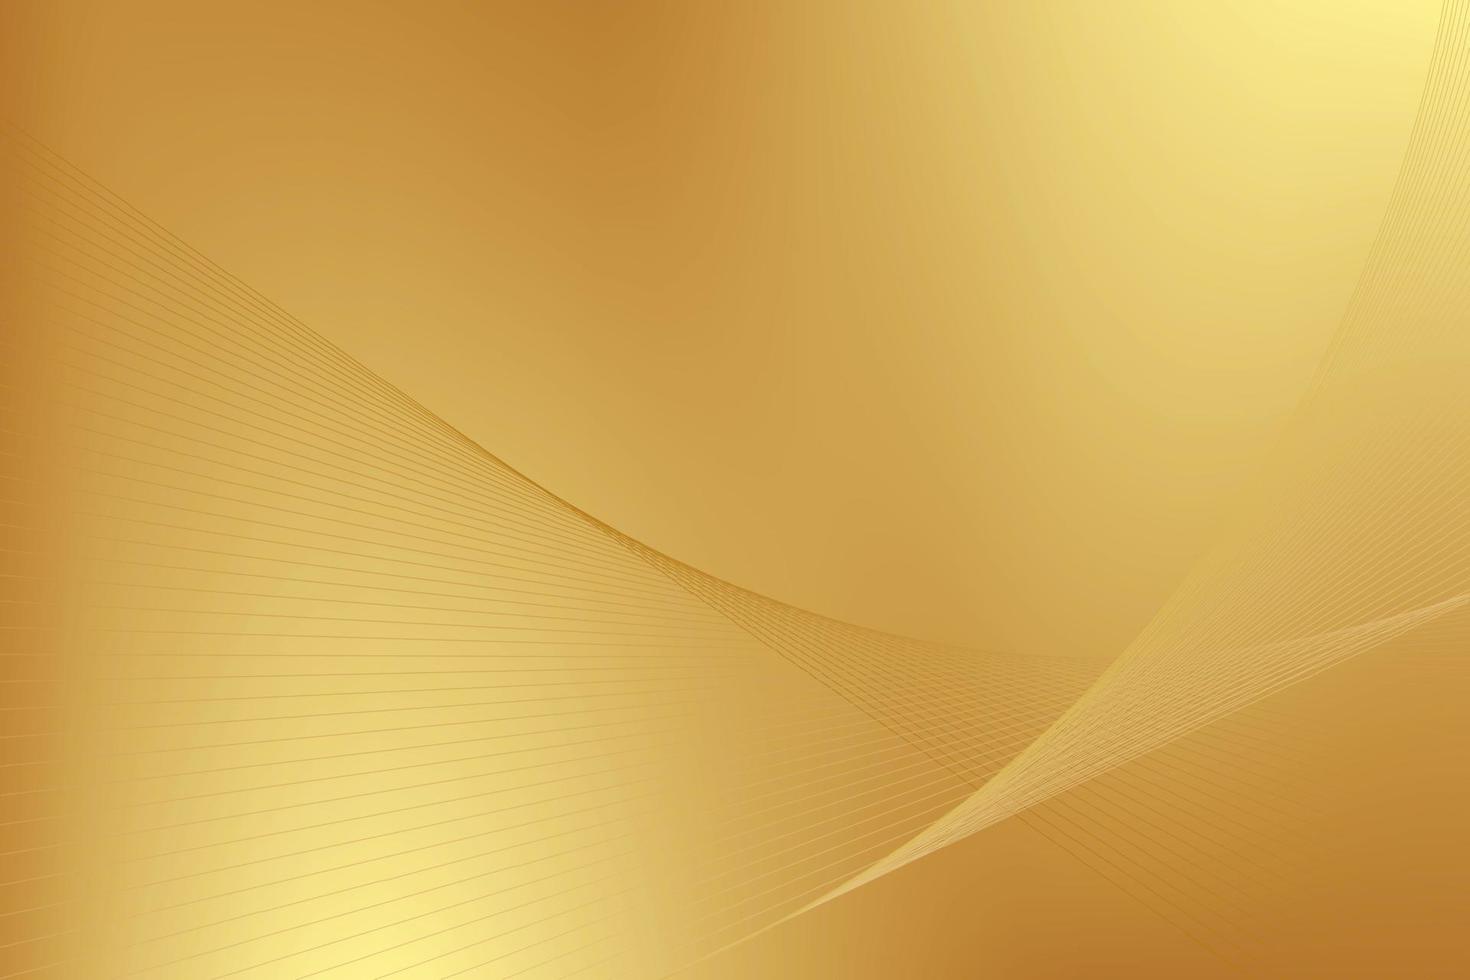 Gold abstract blurred gradient background with wave element, modern stripes. Vector illustration.